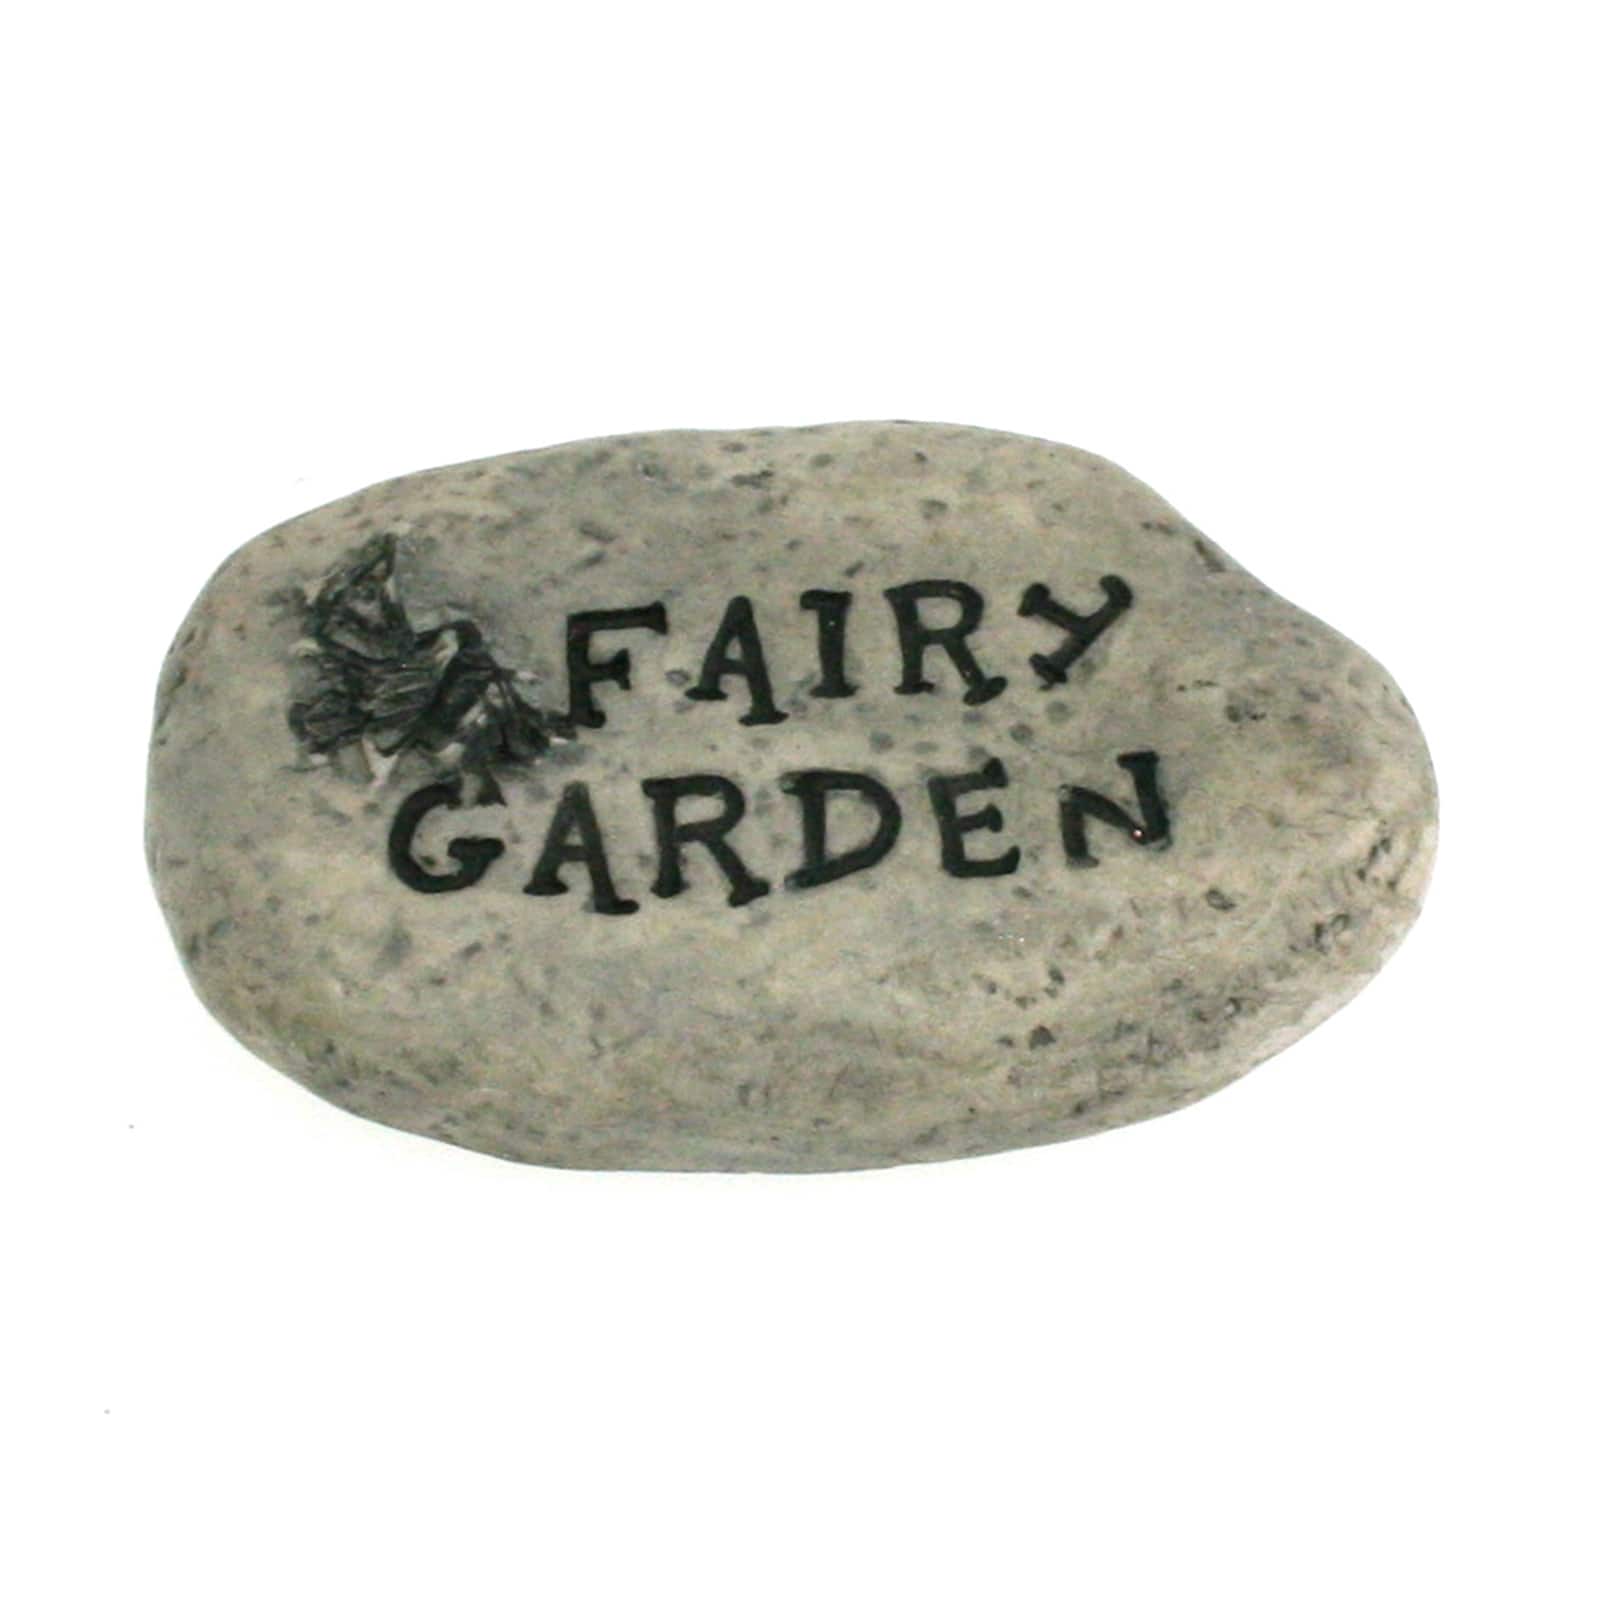 Find The Miniatures Fairy Garden Stone By Artminds At Michaels